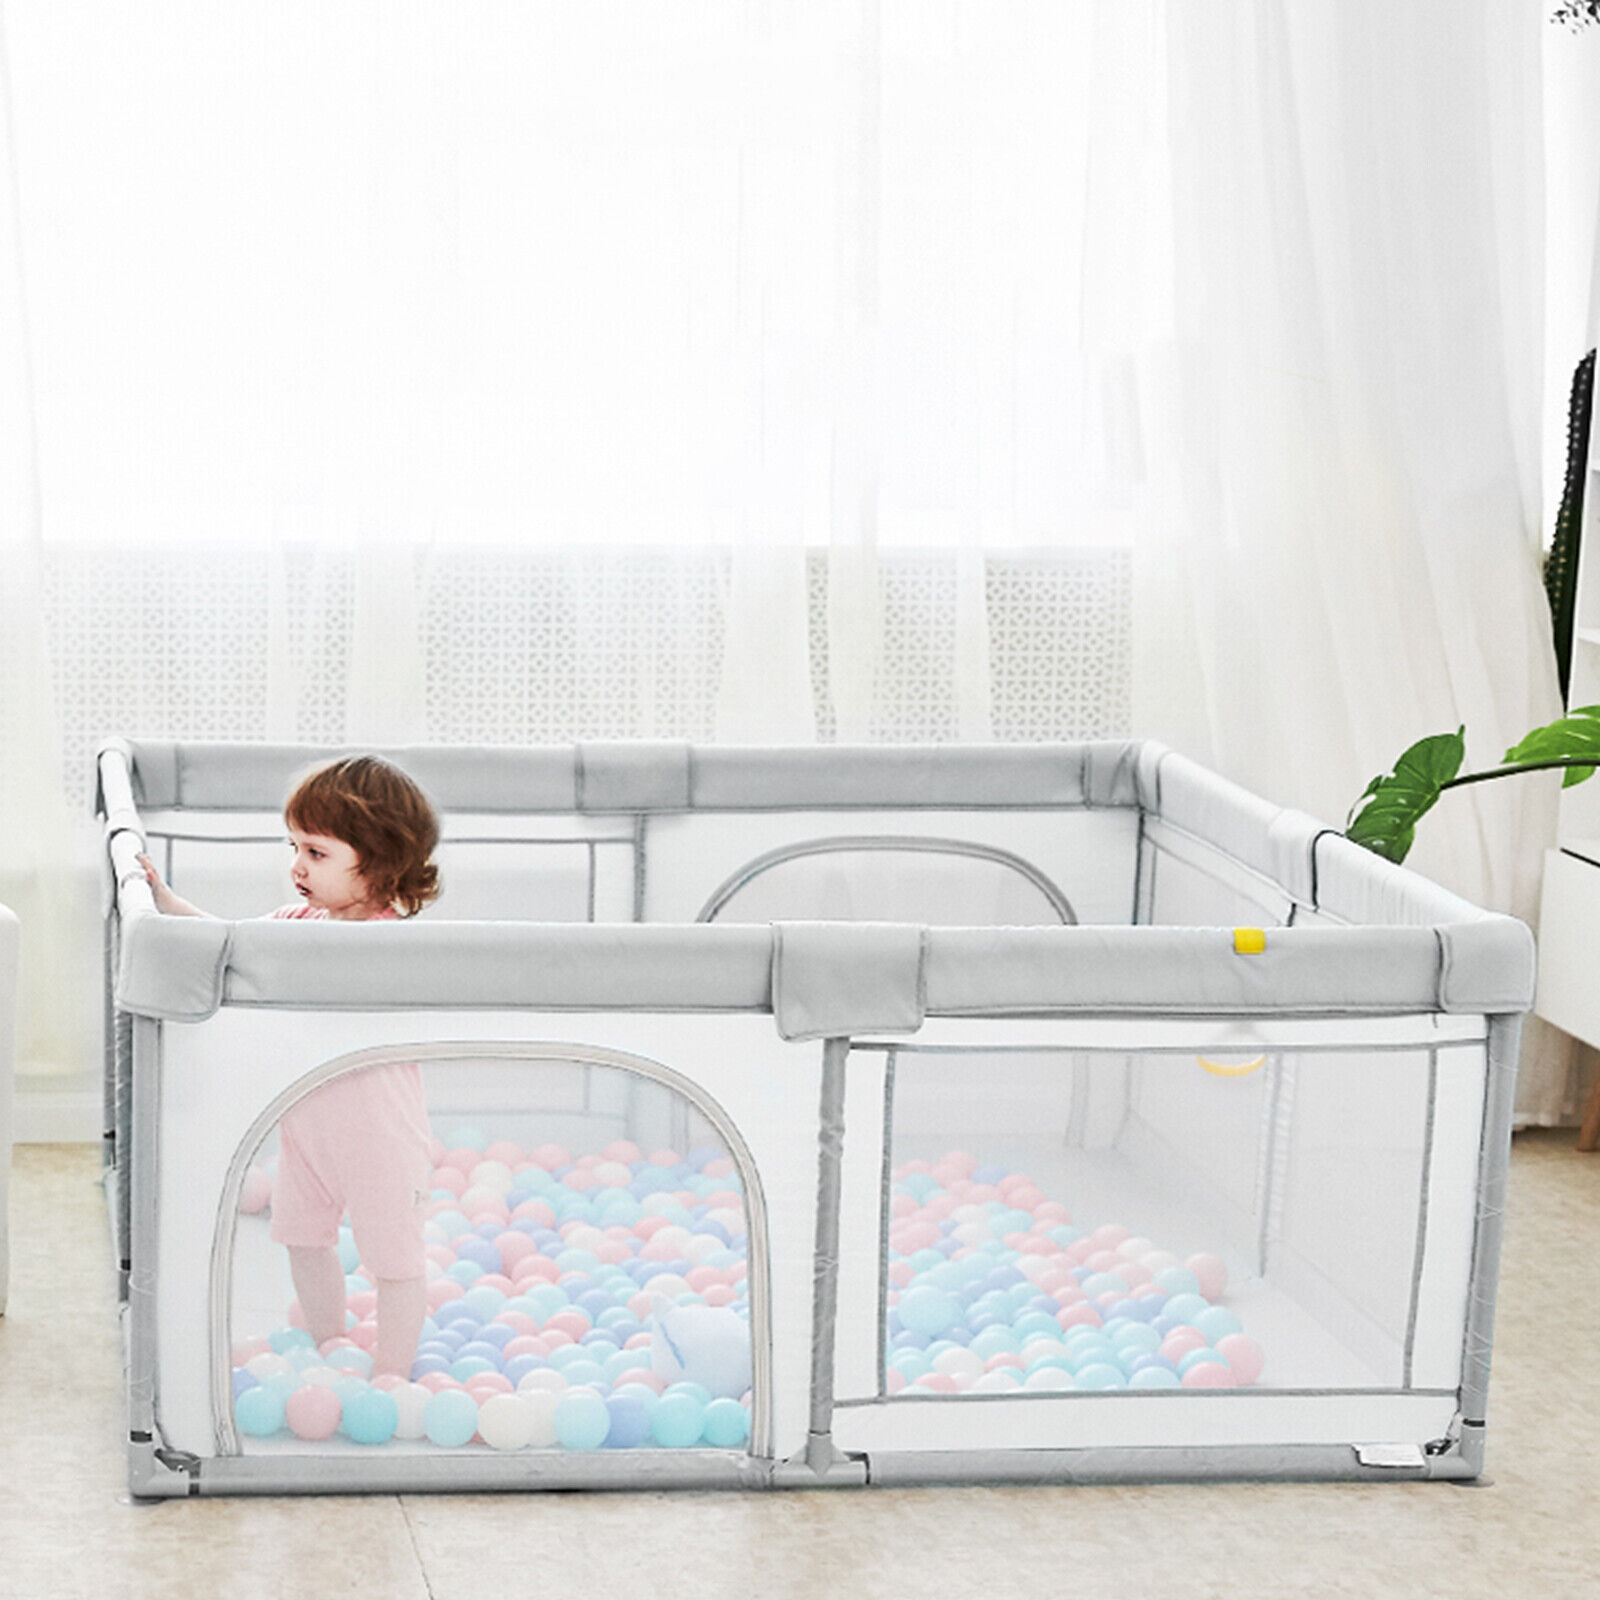 Large Baby Safety Dallas Mall Low price Playpen Play Toddler Kids Center Activity Yard